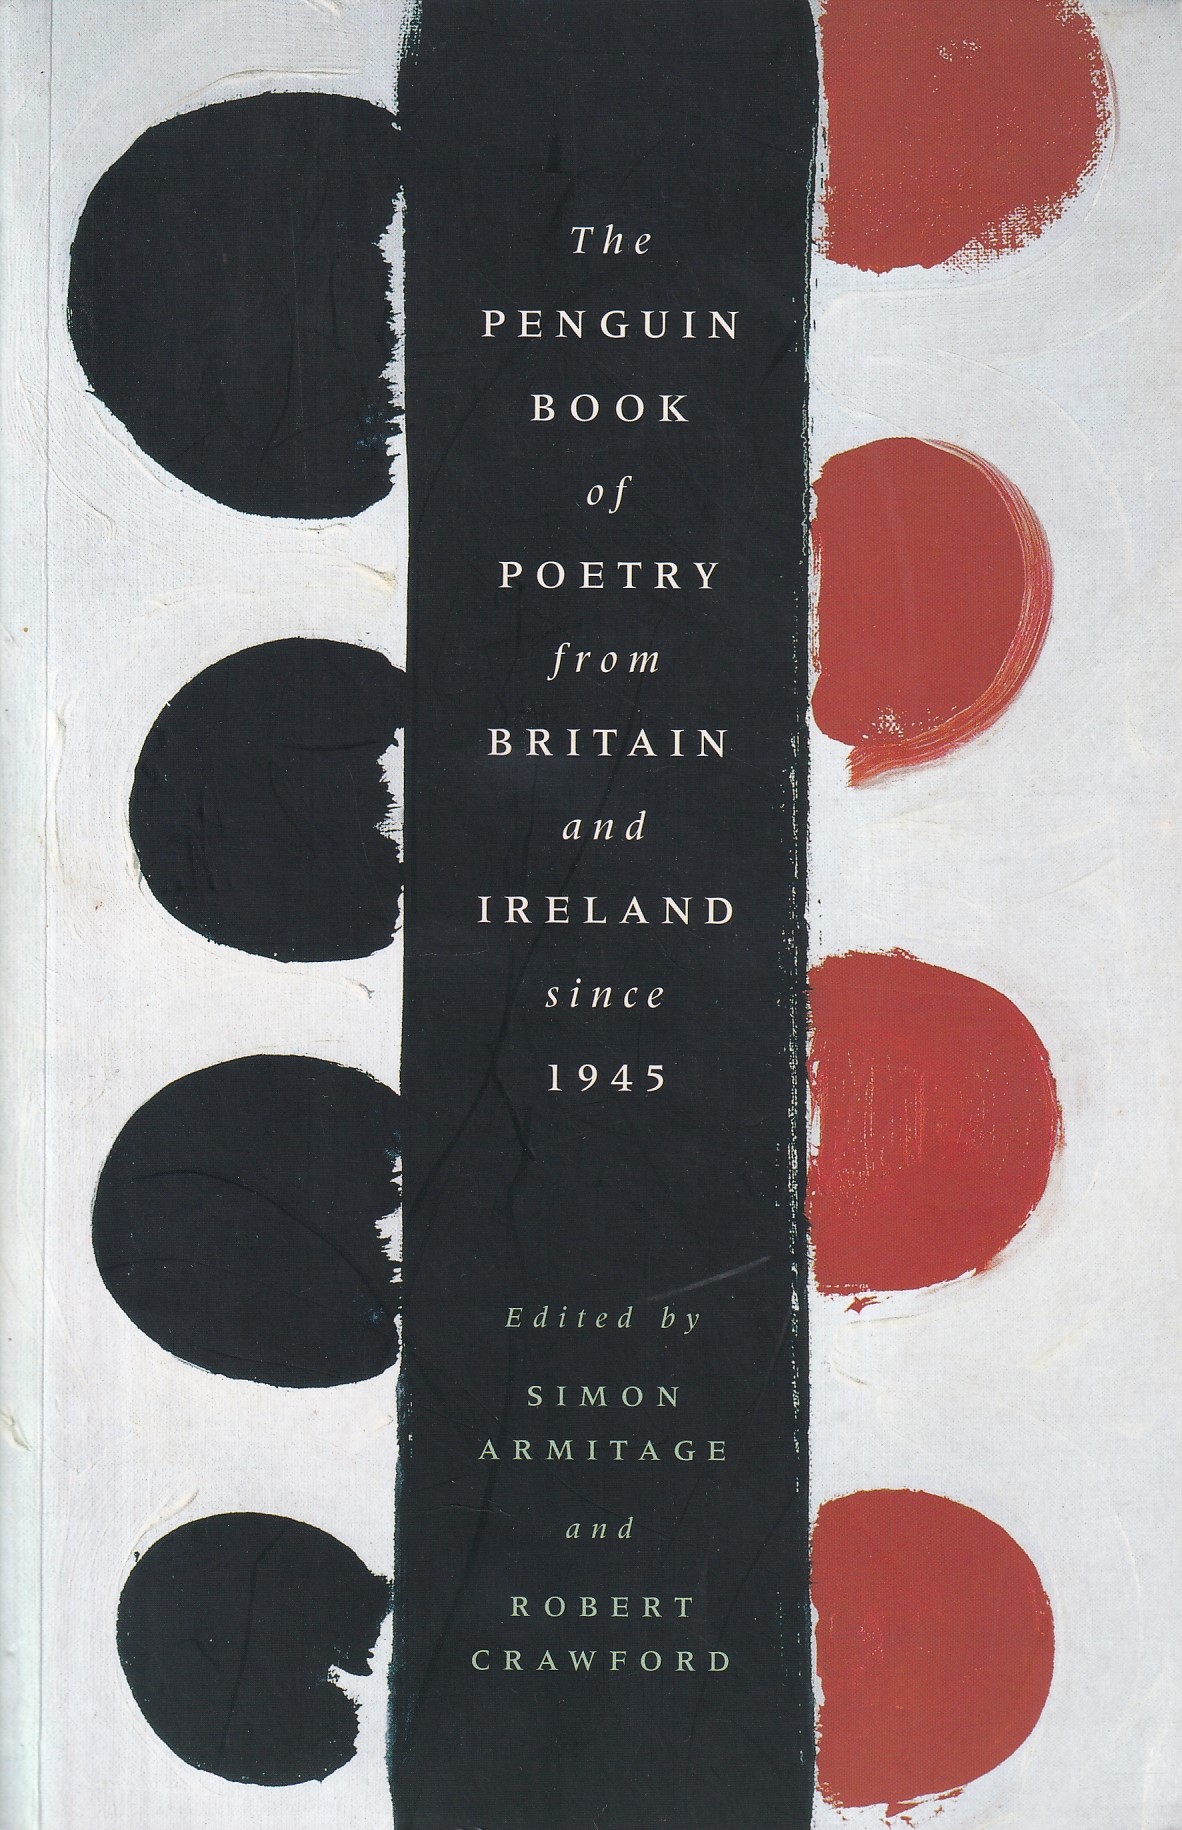 The Penguin Book of Poetry from Britain And Ireland Since 1945 by Simon Armitage & Robert Crawford (eds.)